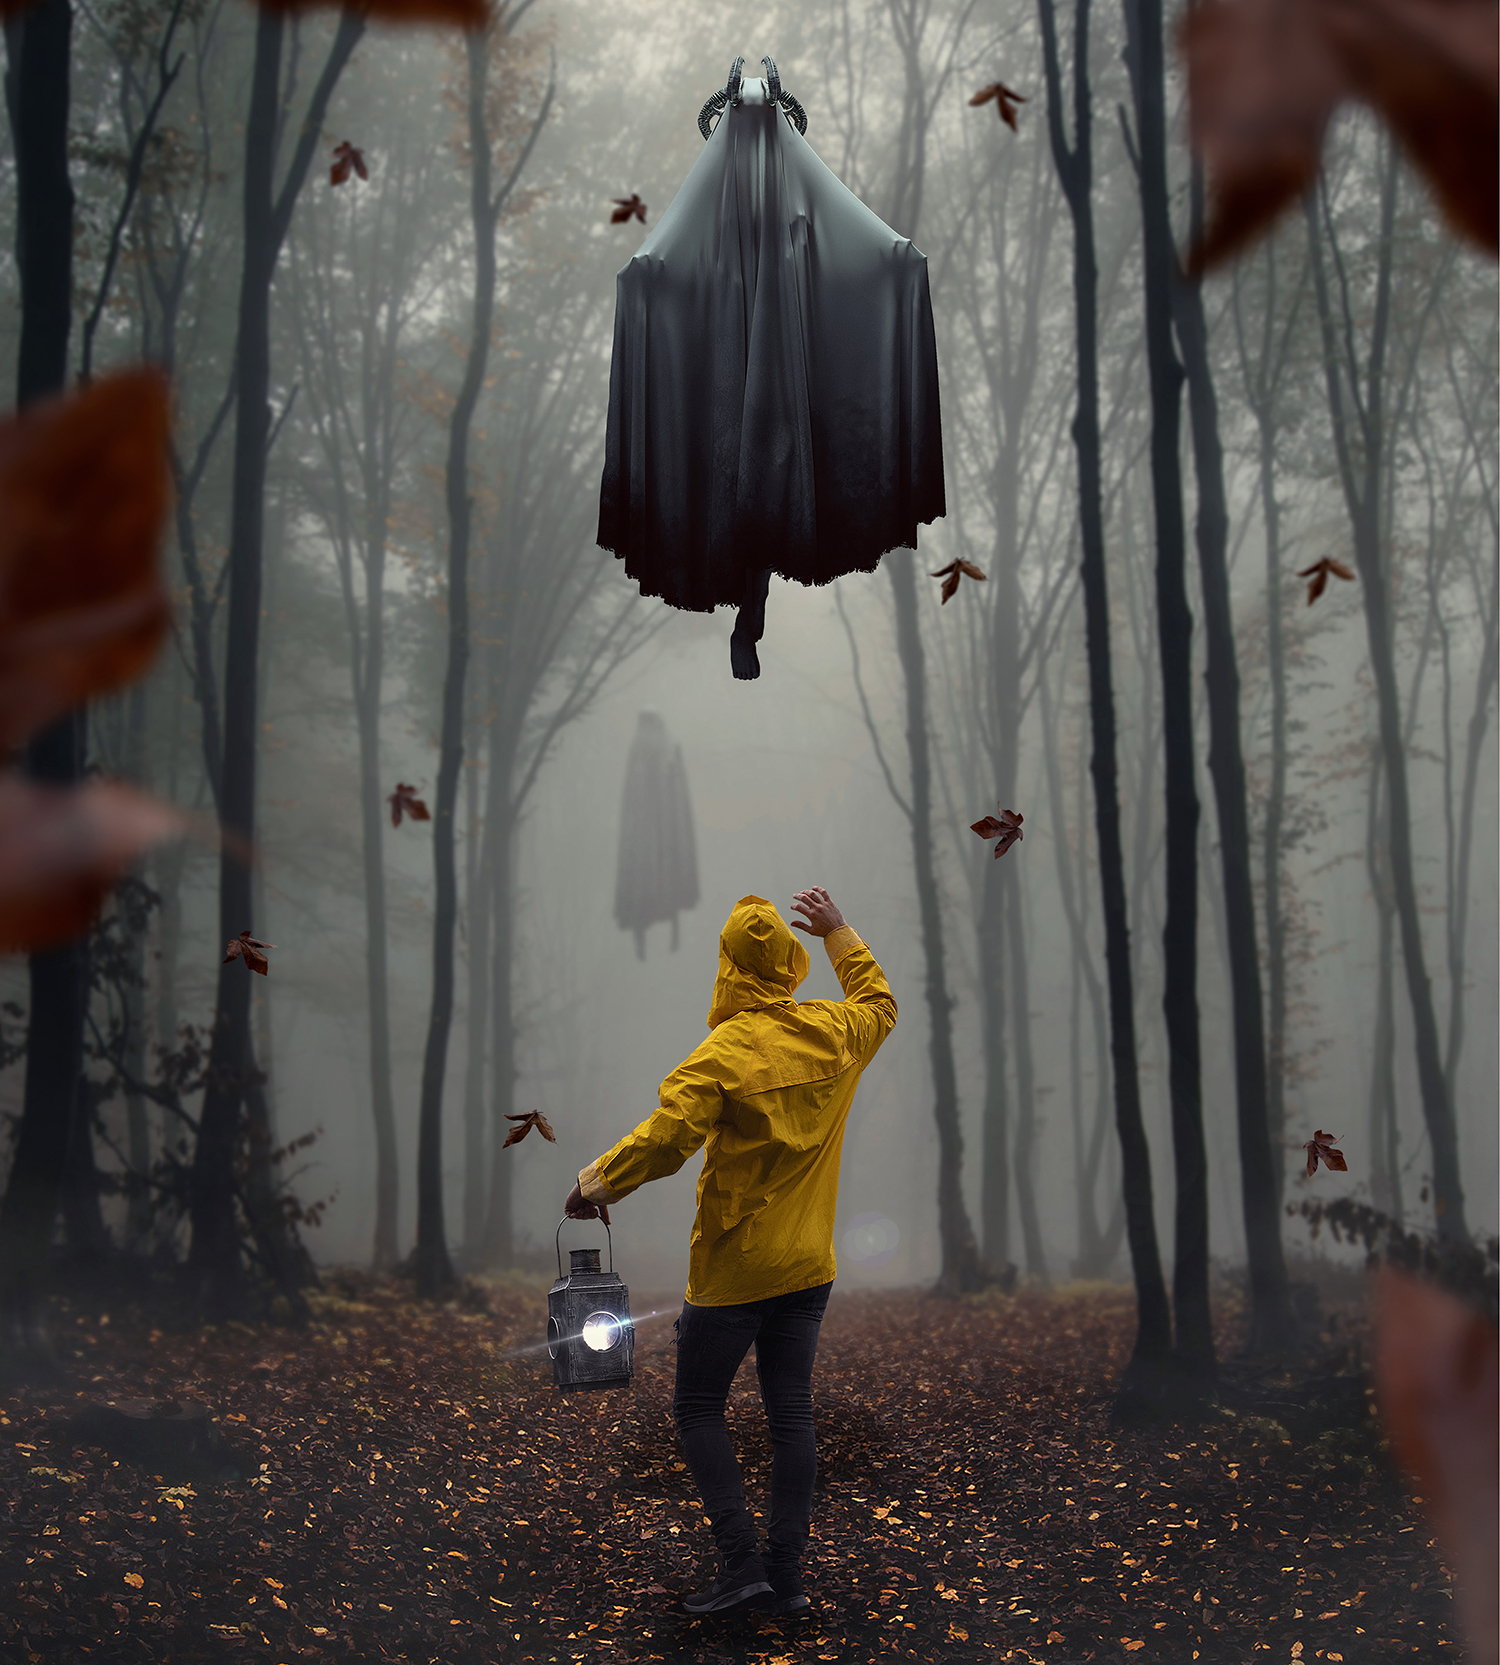  Kavan Cardoza "The Road less Traveled", mysterious scene with man in yellow jacket, surreal